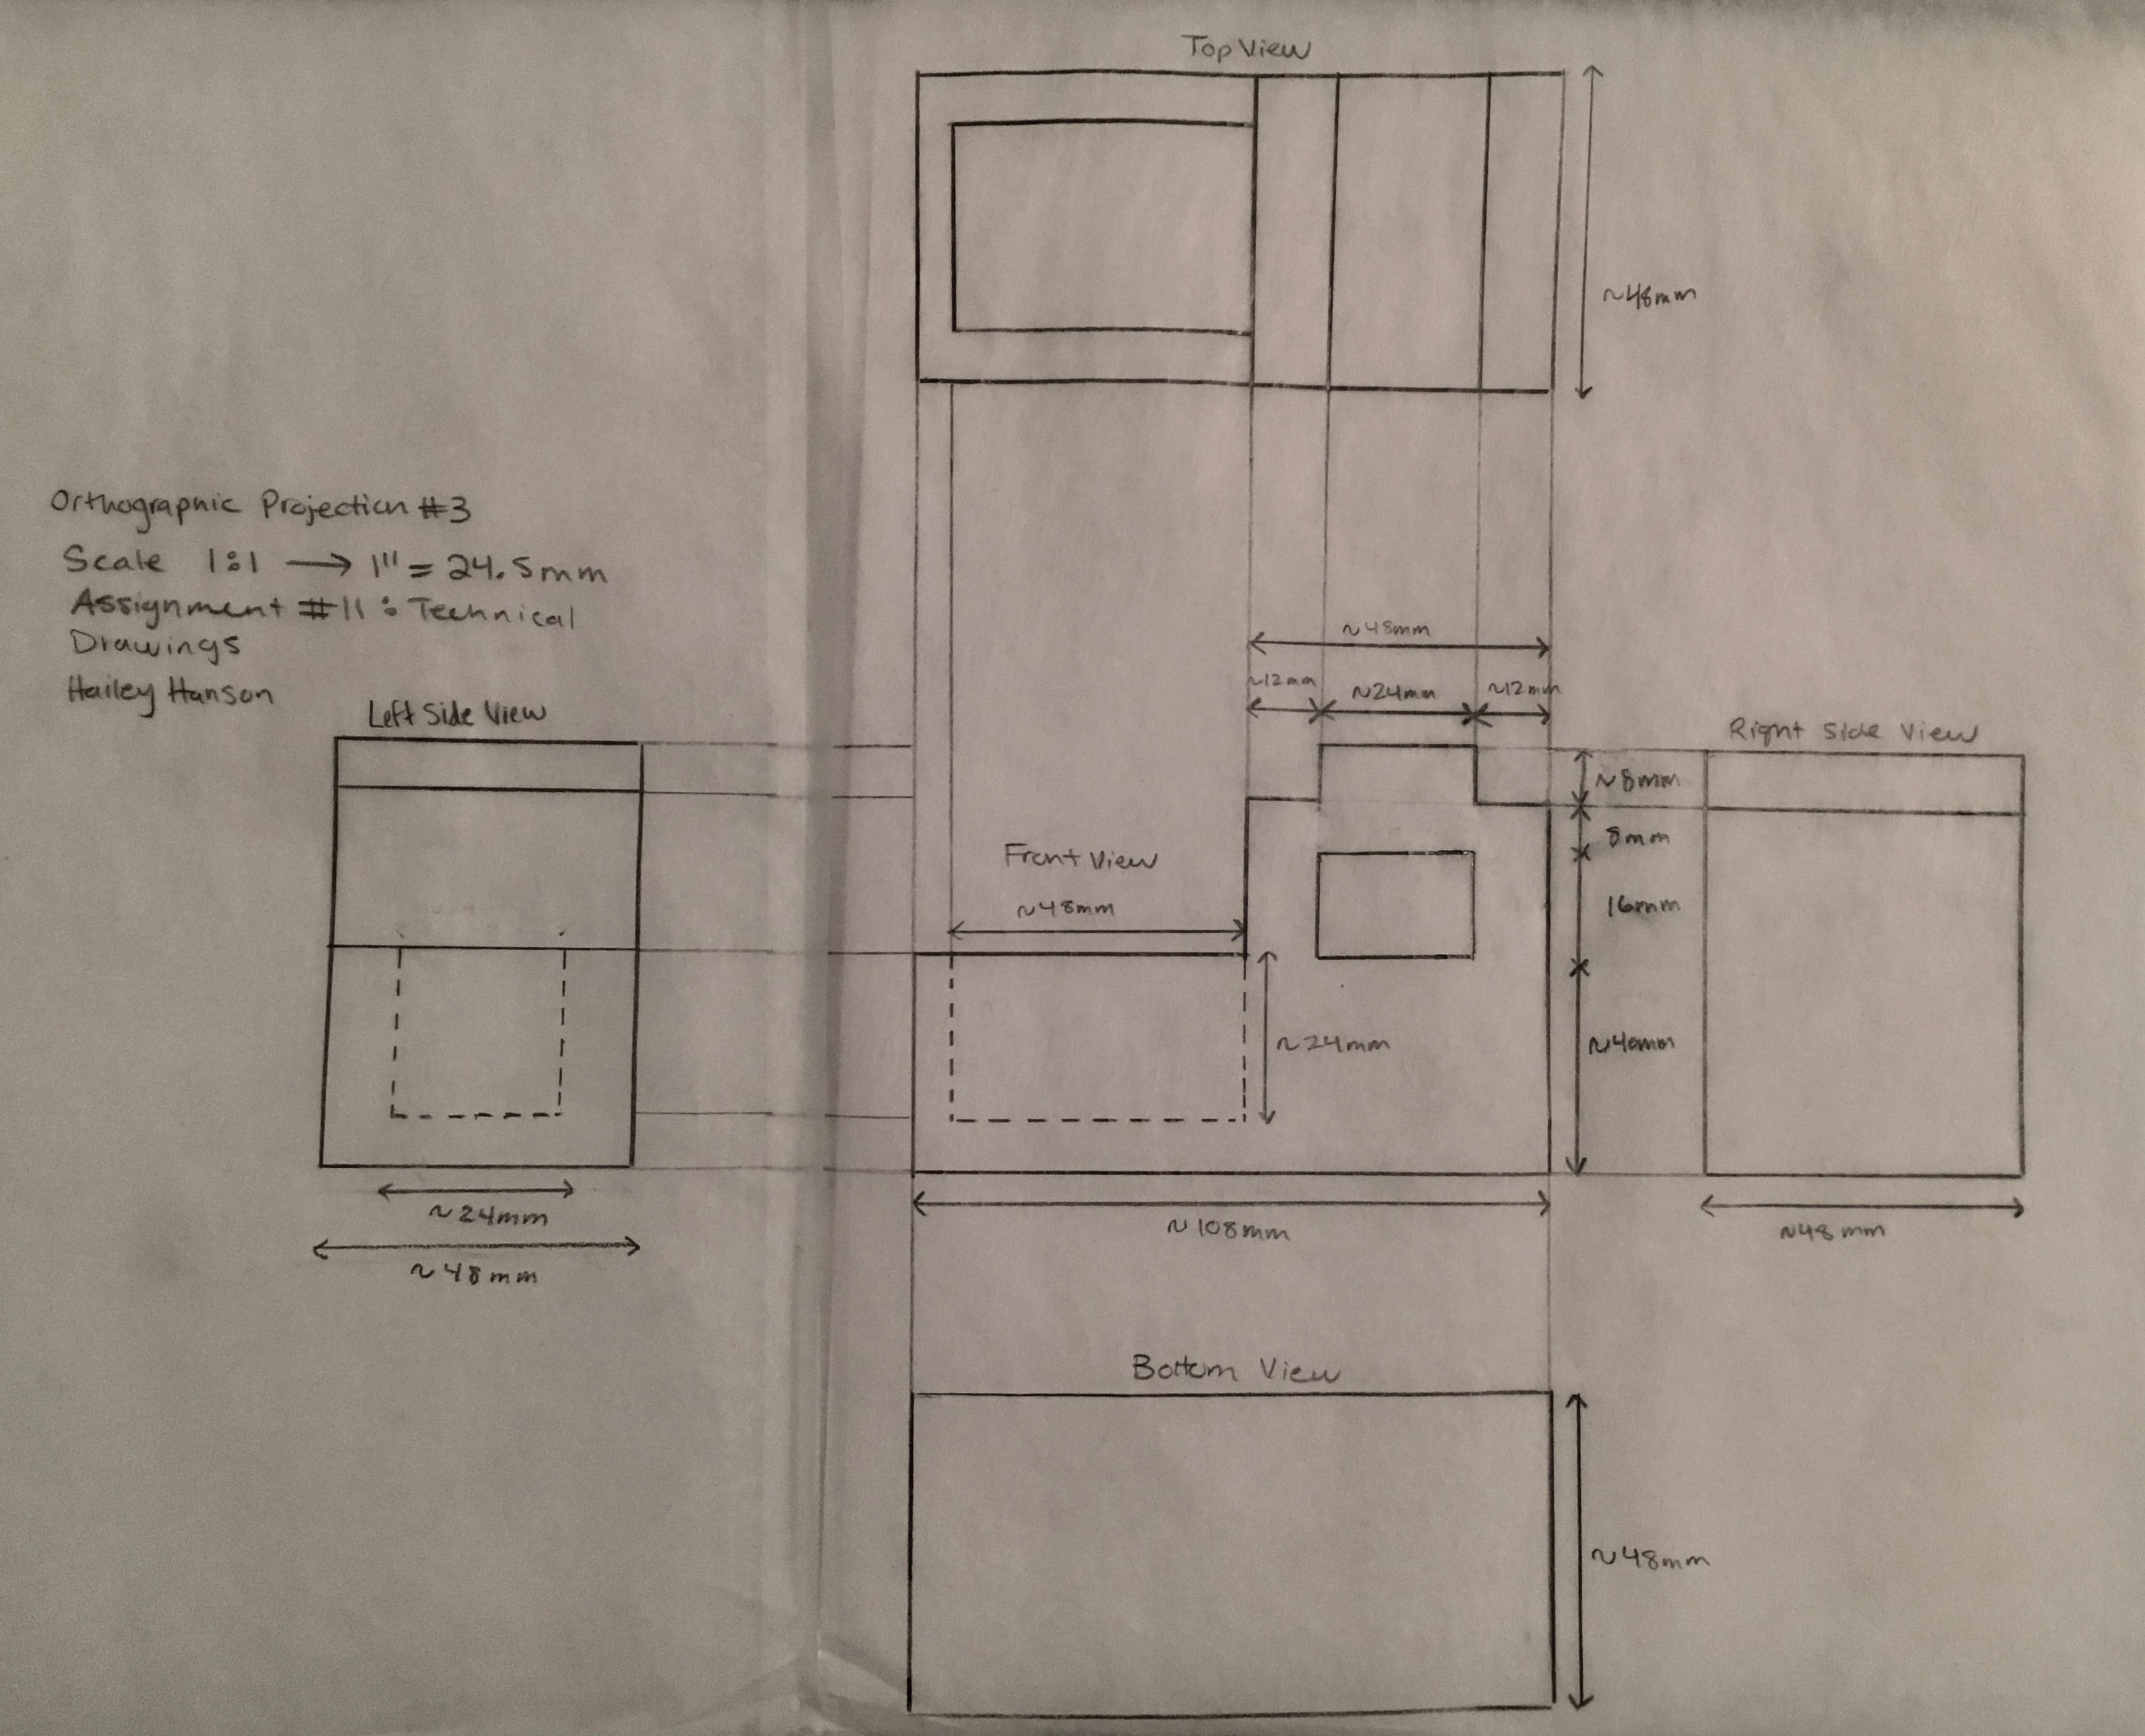 Assignment #11: Technical Drawings